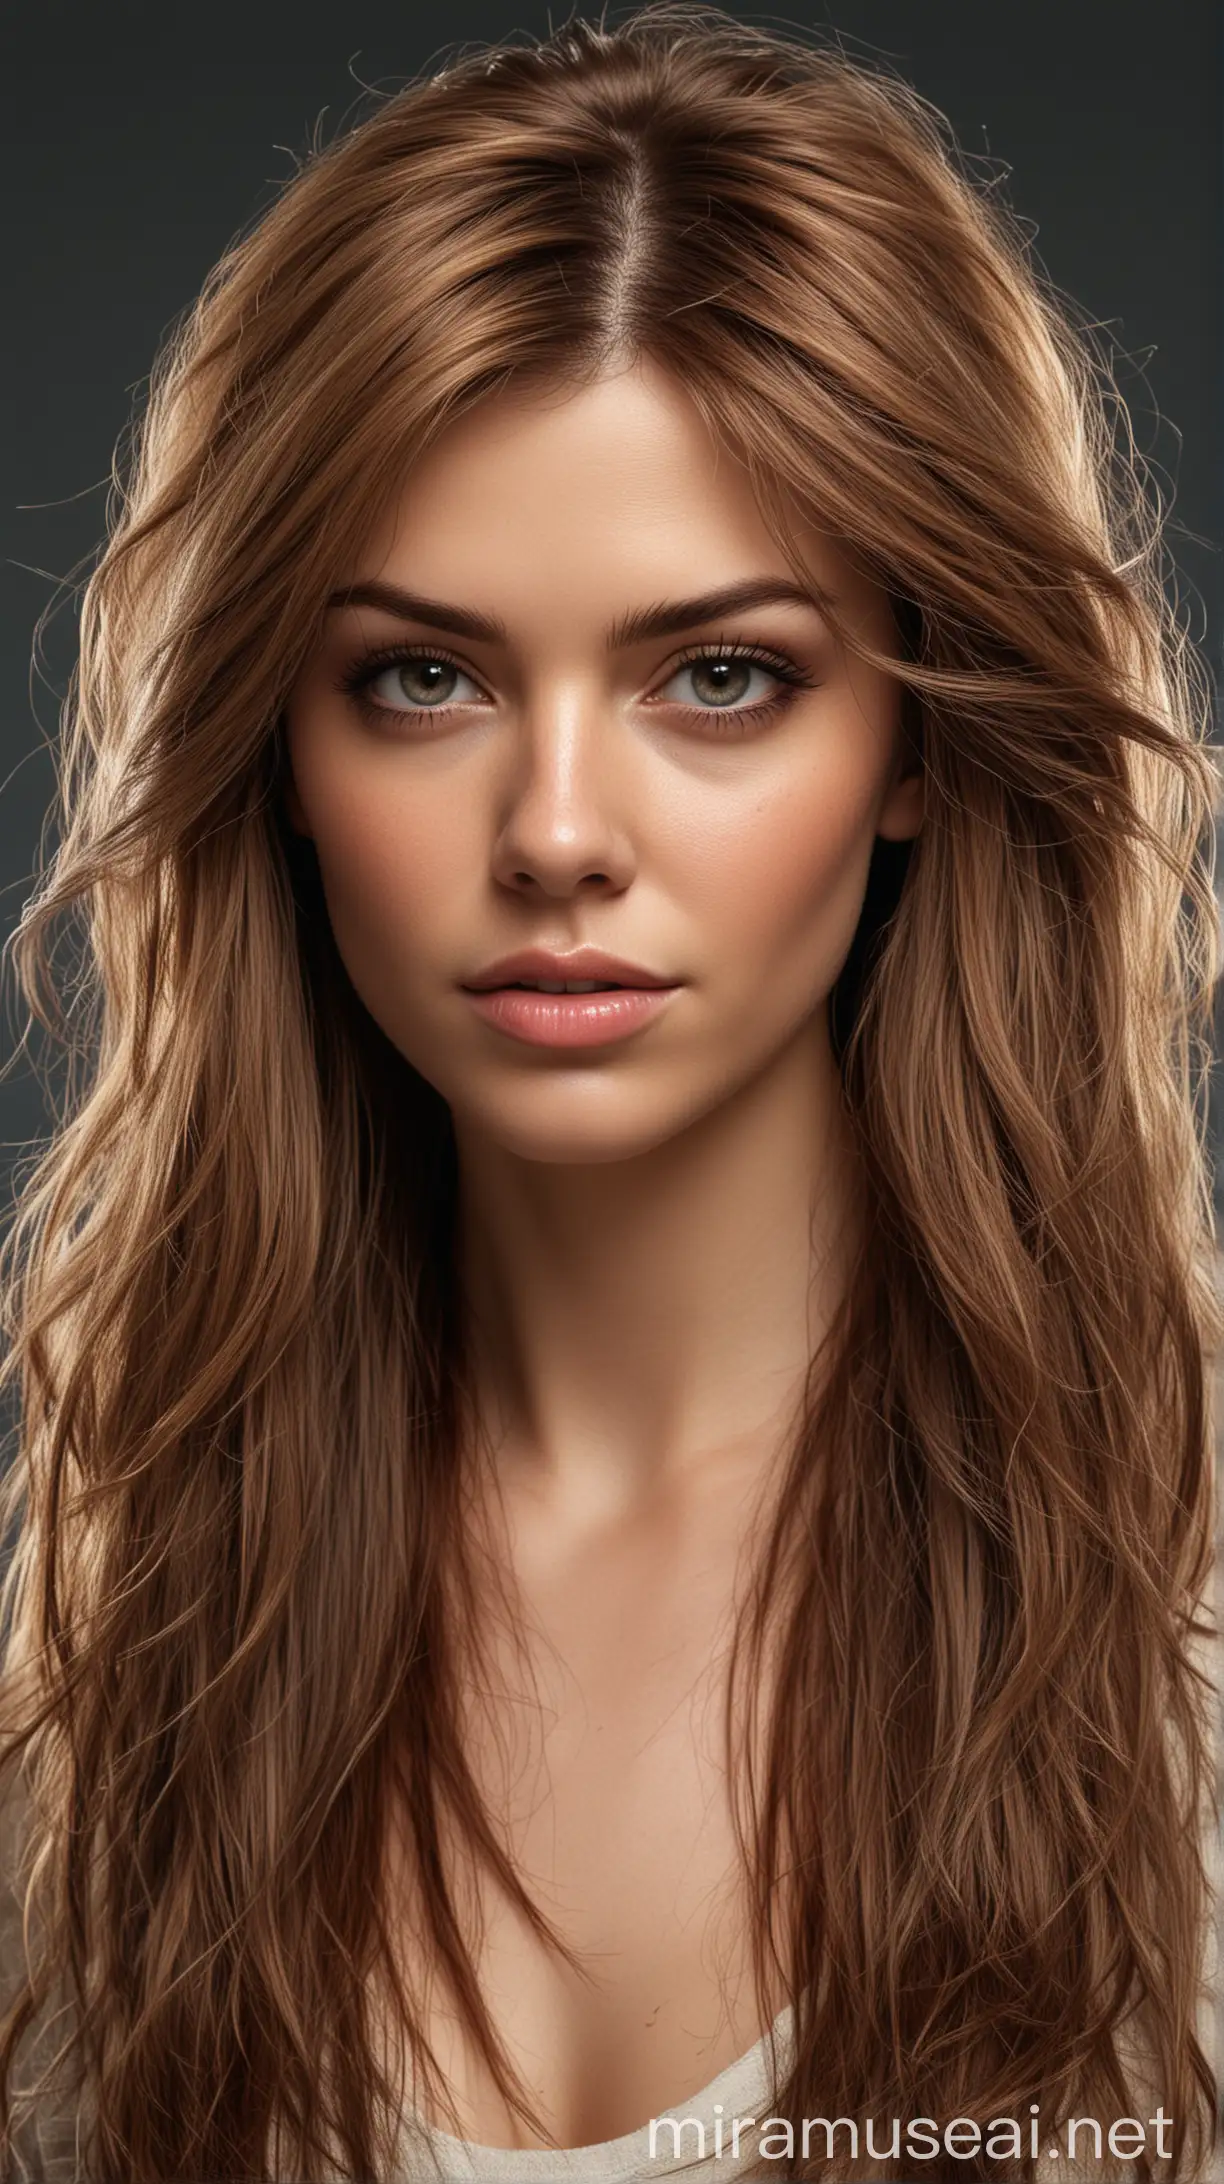 Hyper realistic image of female with strong hairs